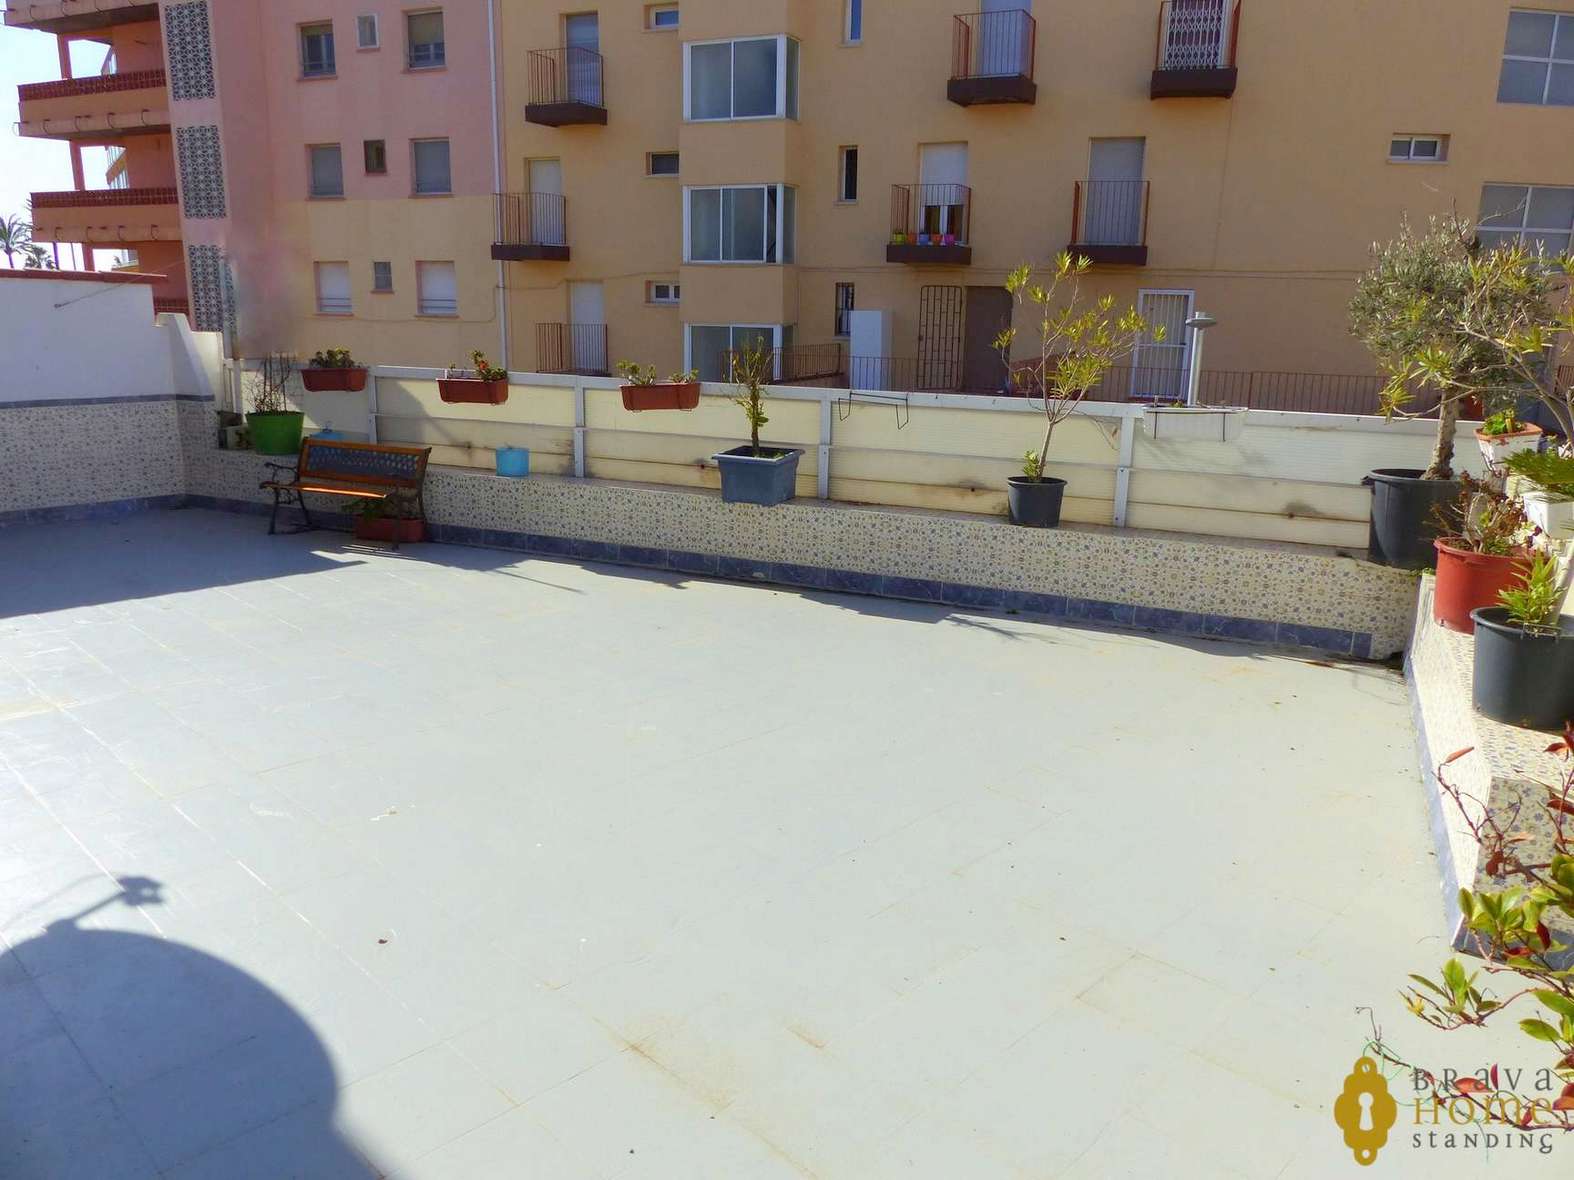 Apartment with 70m2 terrace at 100m from the beach of Rosas - Santa Margarita 